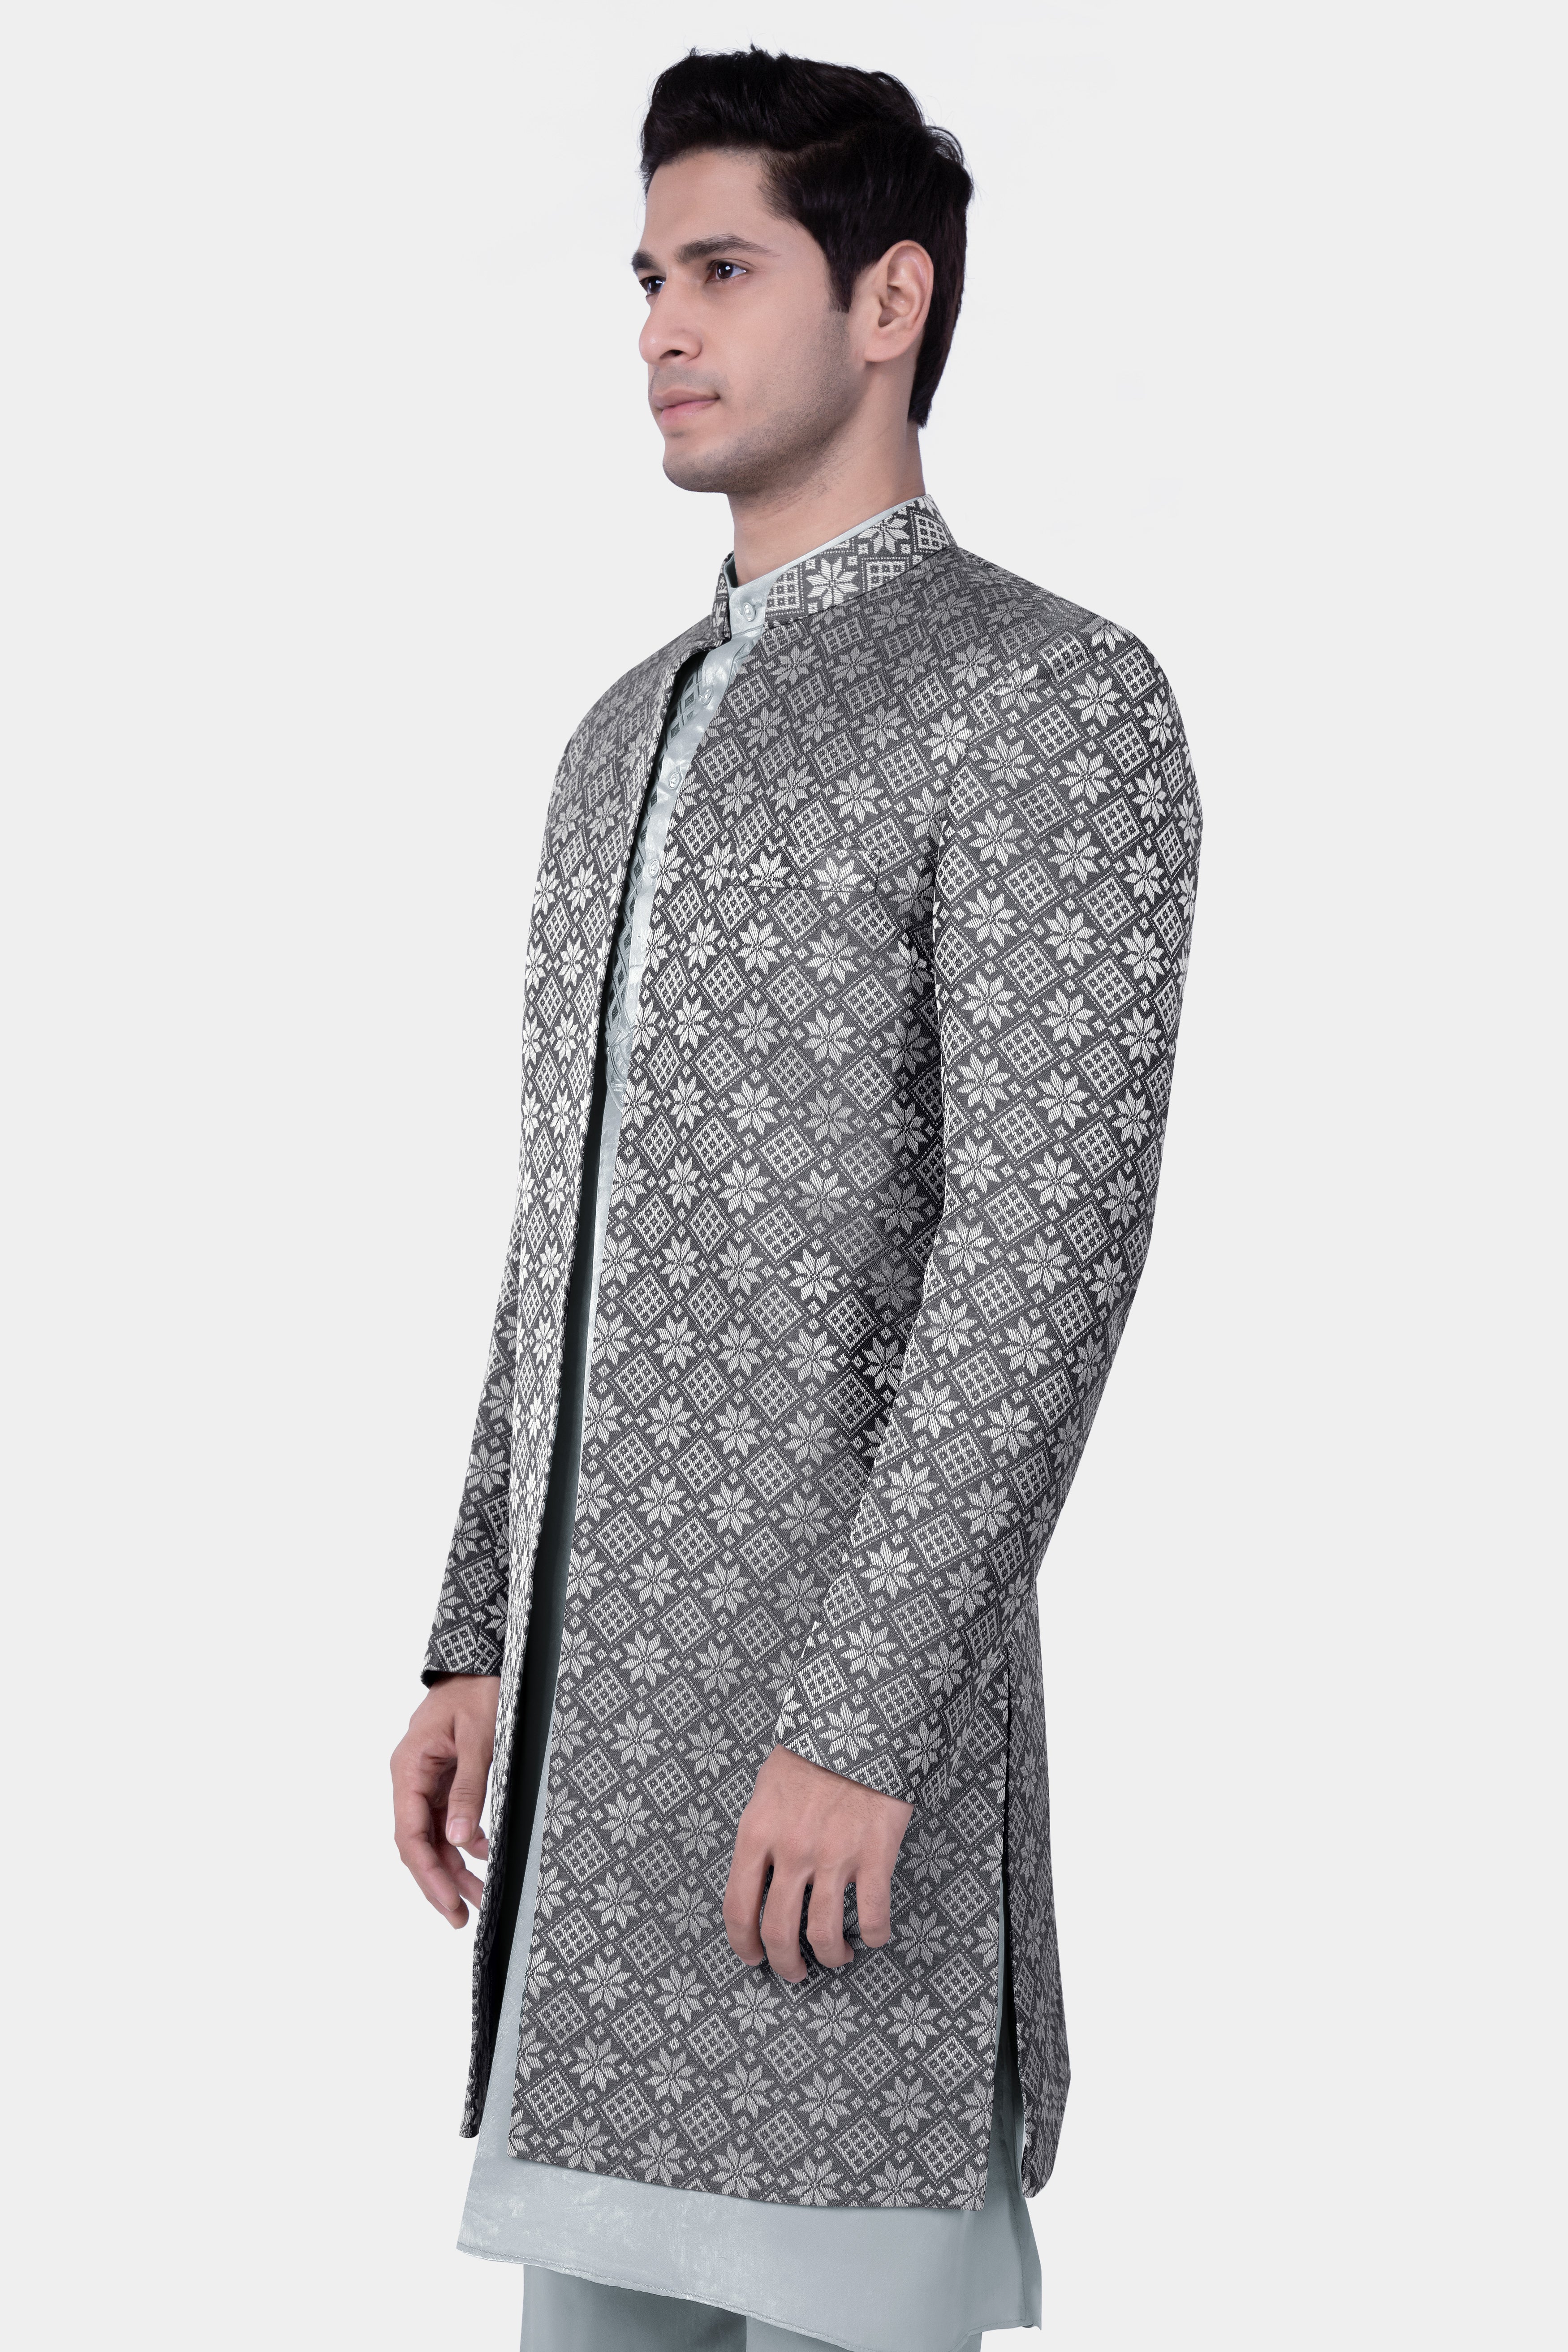 Gravel Gray Jacquard Party Wear Indo-Western Set